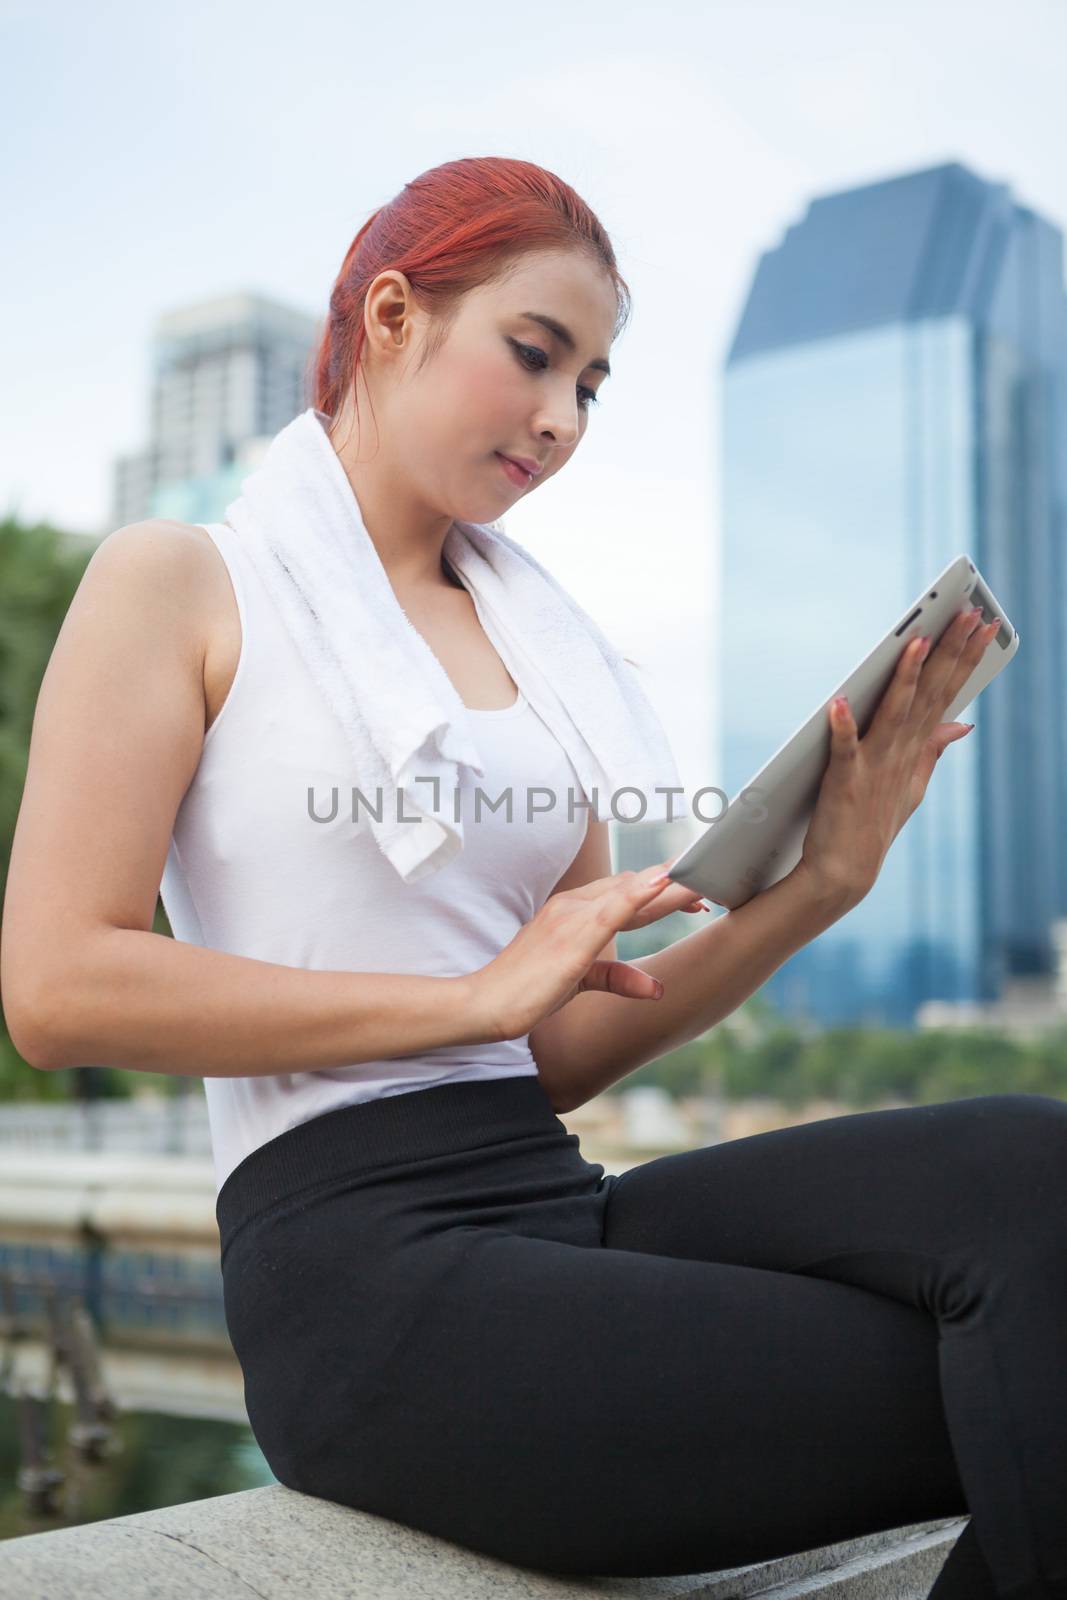 beautiful fitness asian woman with tablet in park city